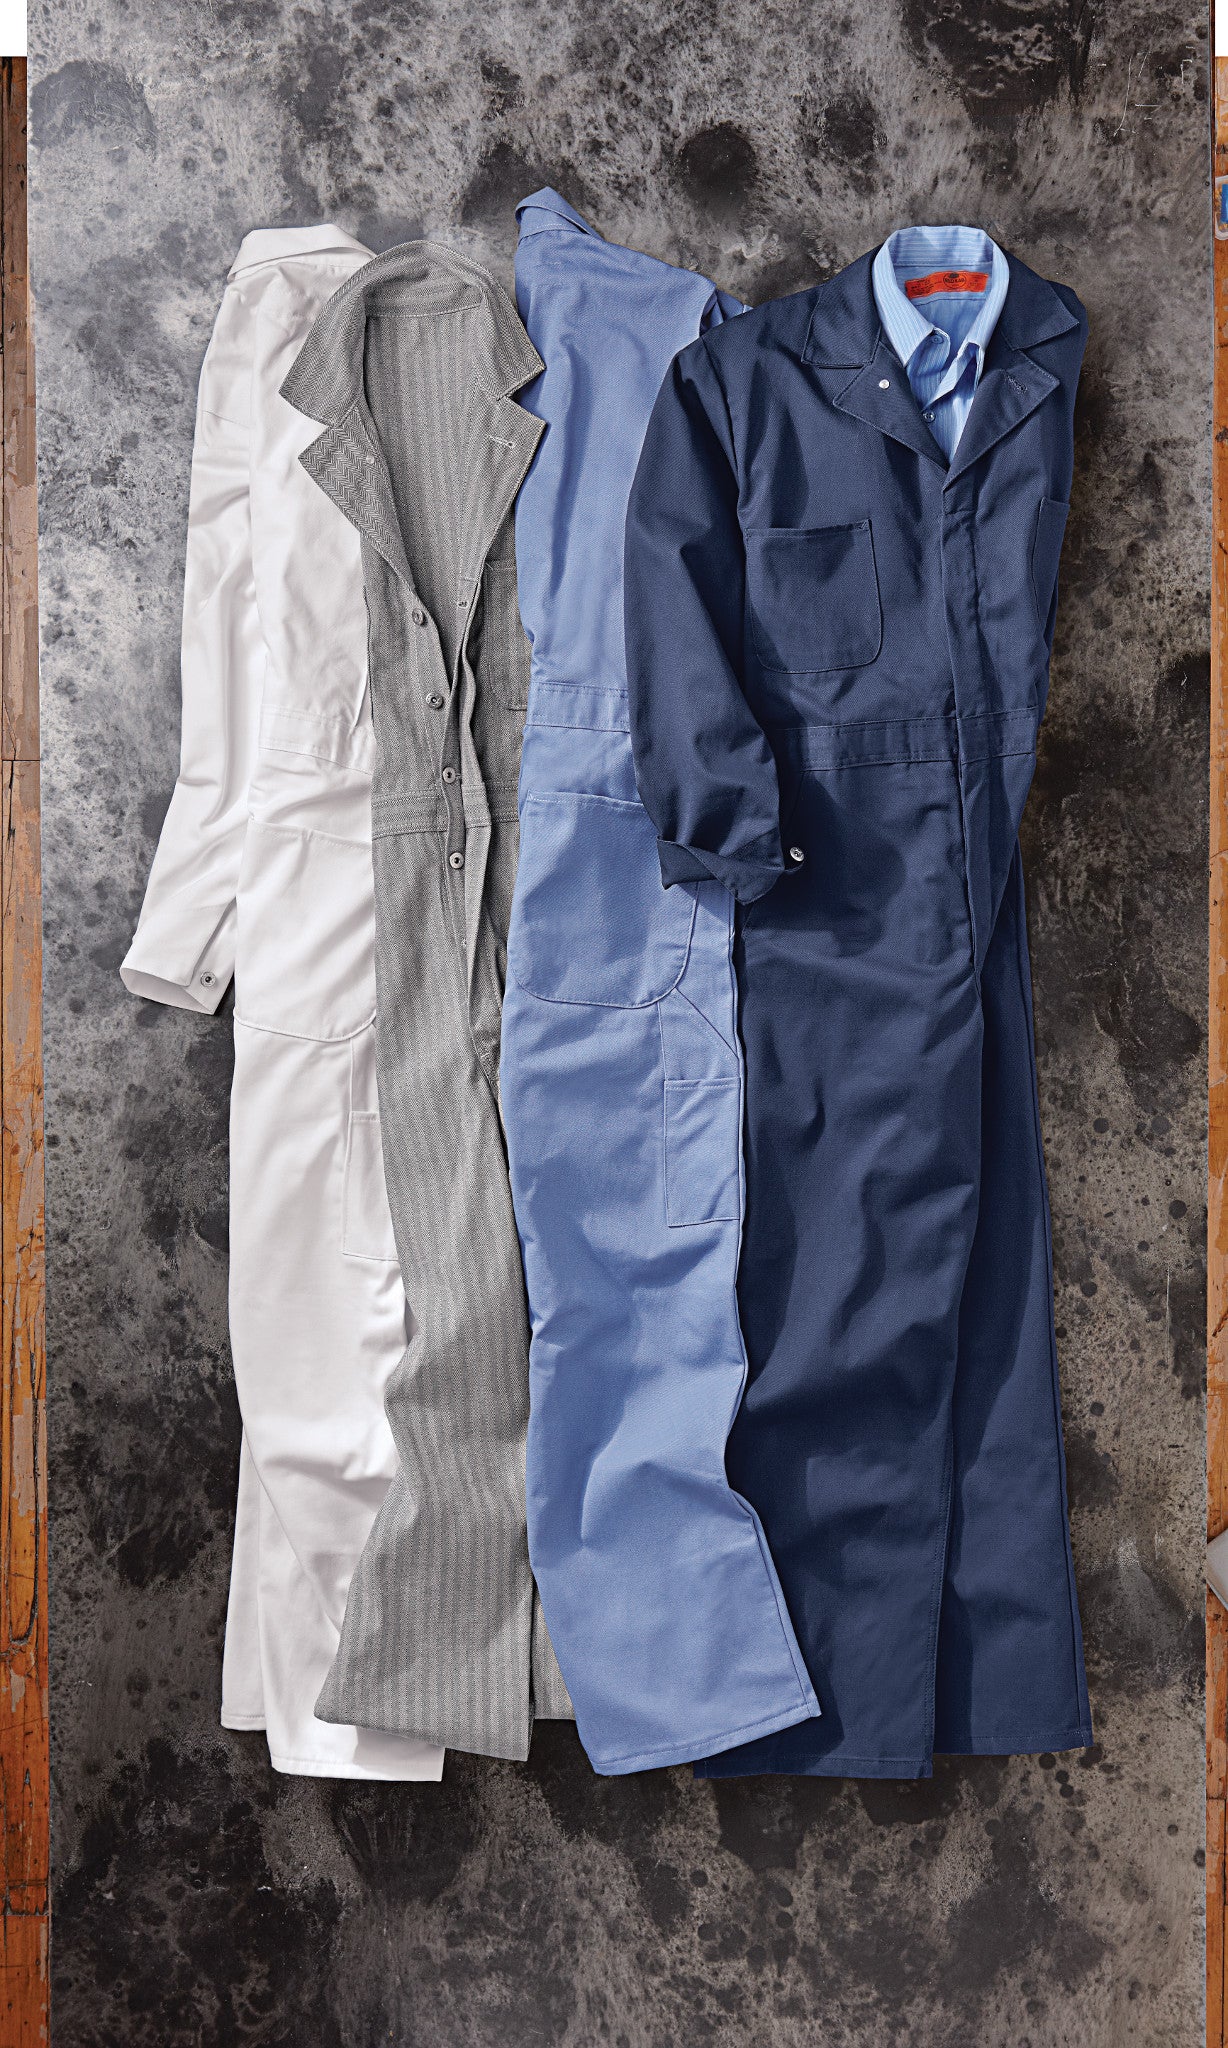 100% Cotton Coverall - Button Front - CC16